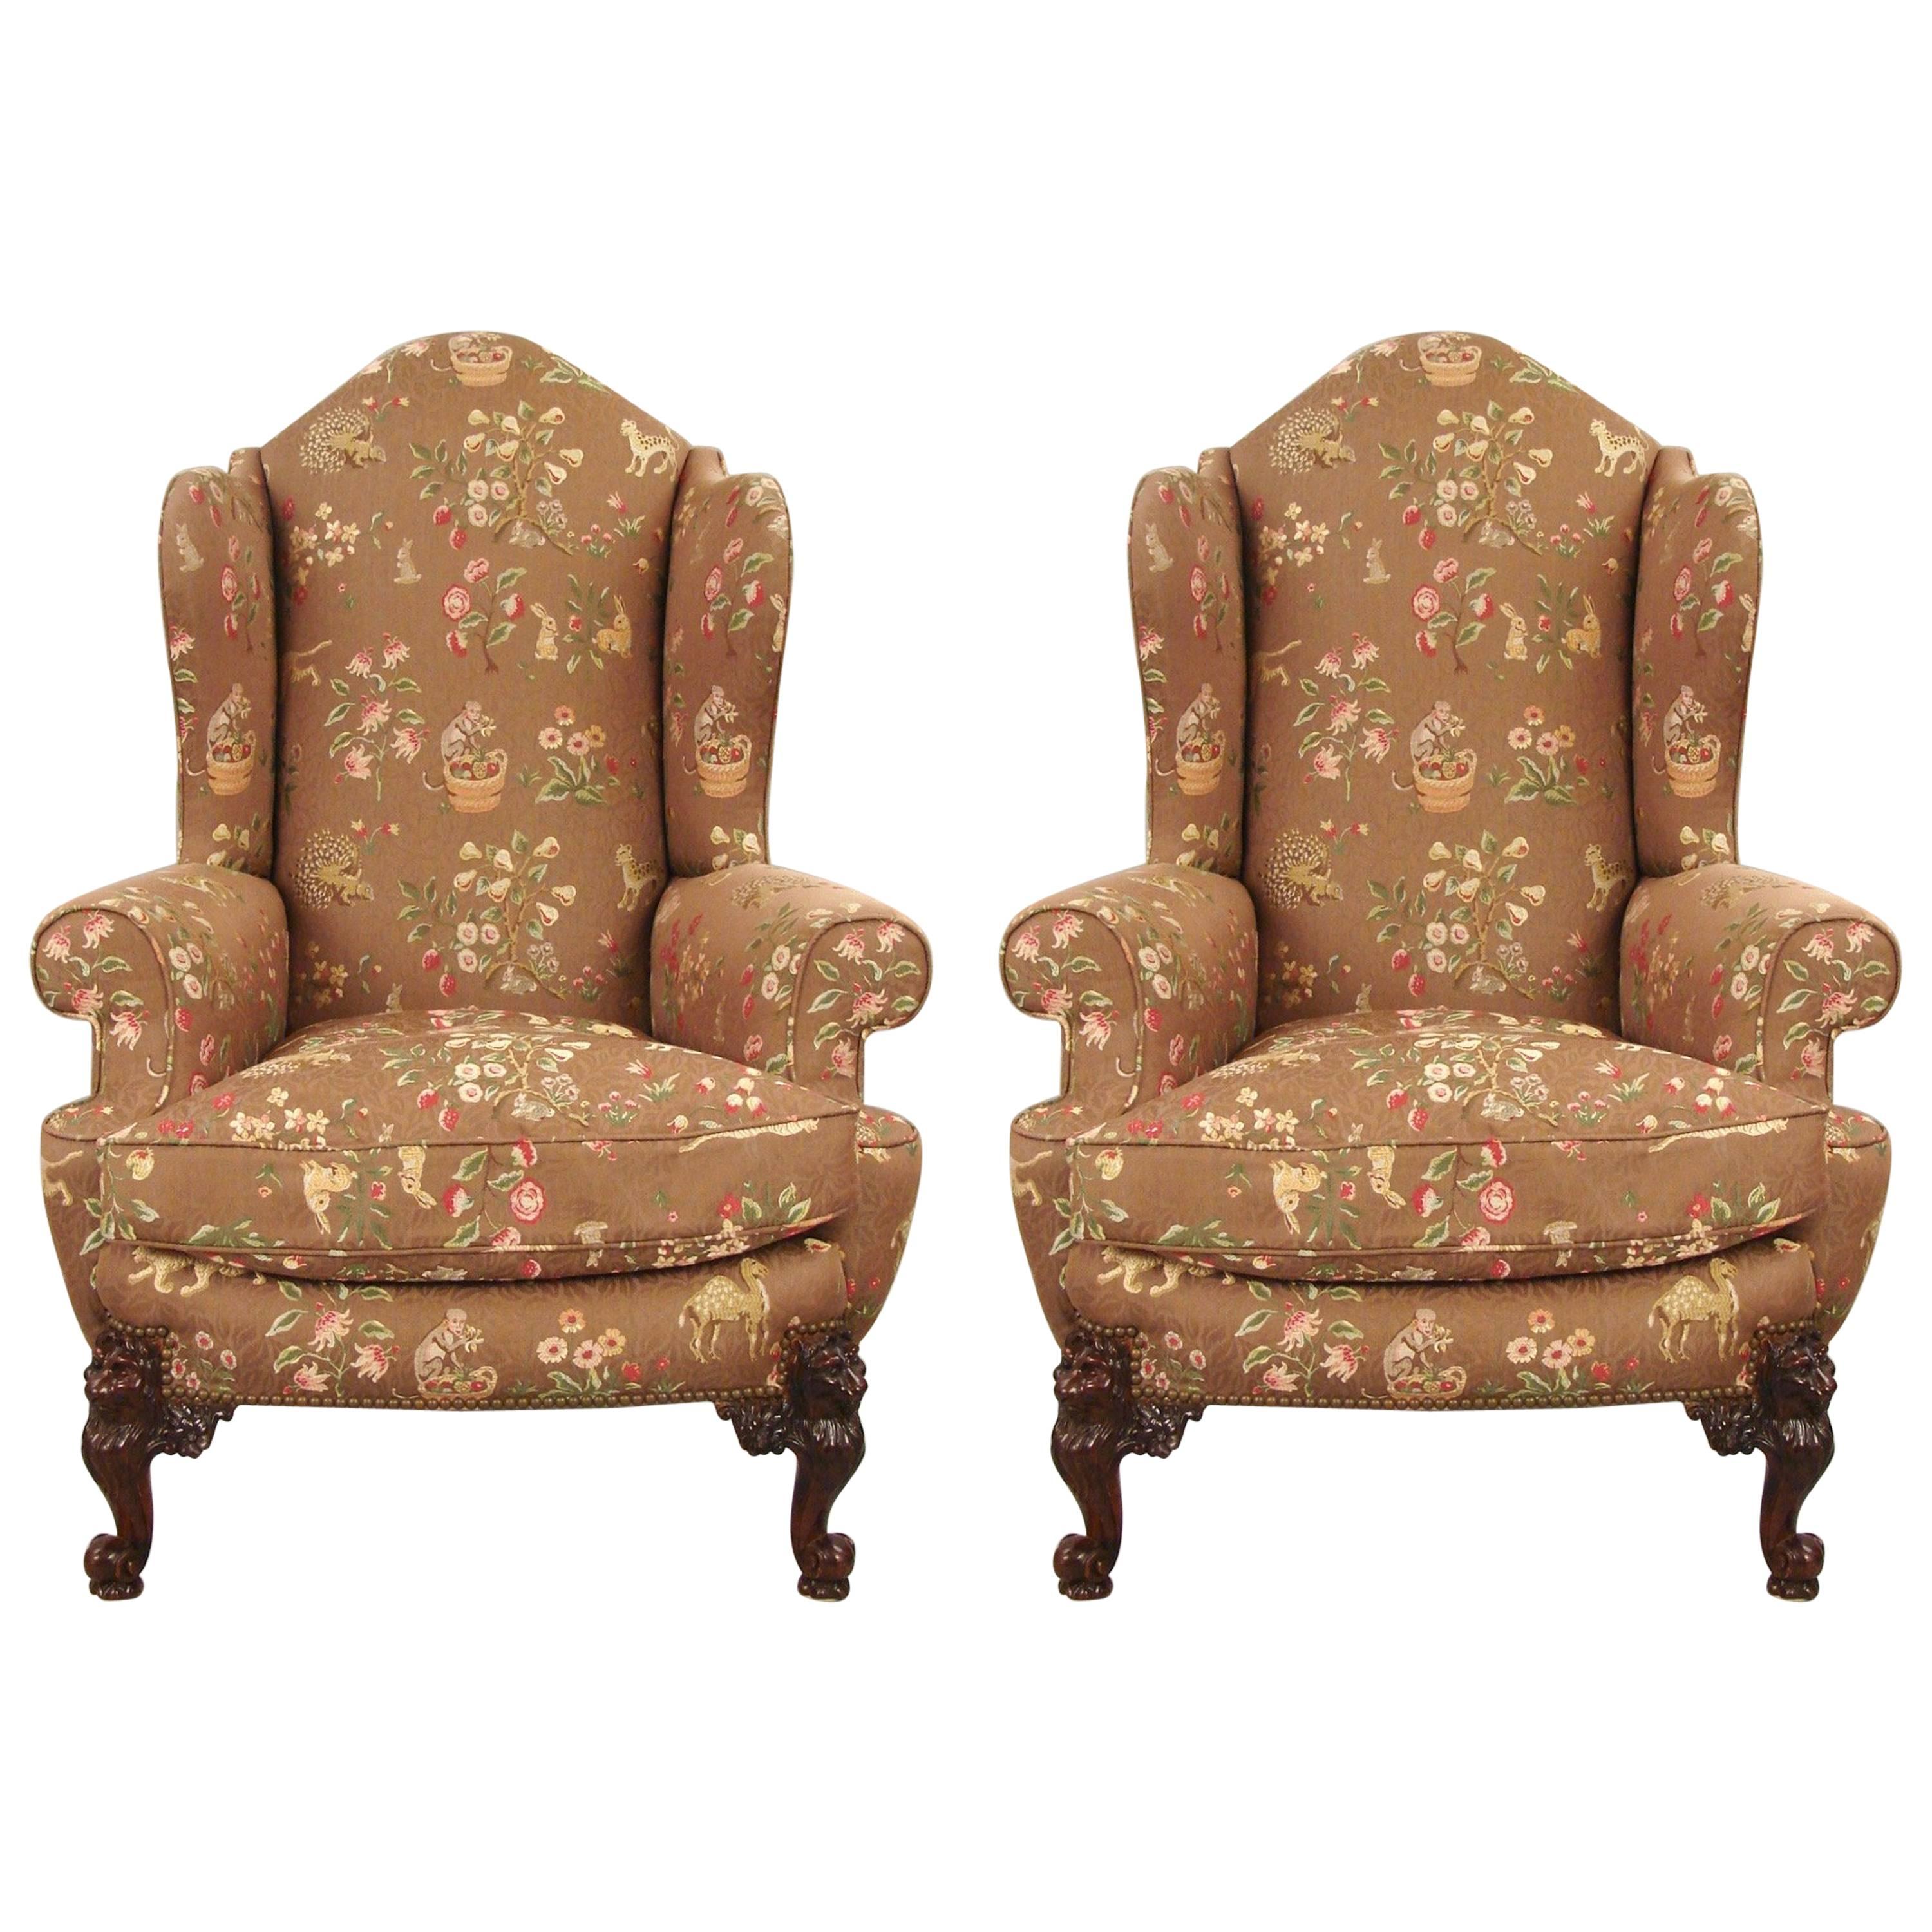 A fine pair of English mahogany wingback armchairs upholstered in an Anglo-Indian style silk or satin fabric with overall small exotic animal upholstery, the well-carved short cabriole legs carved with lion's faces flanked by floral rosettes.